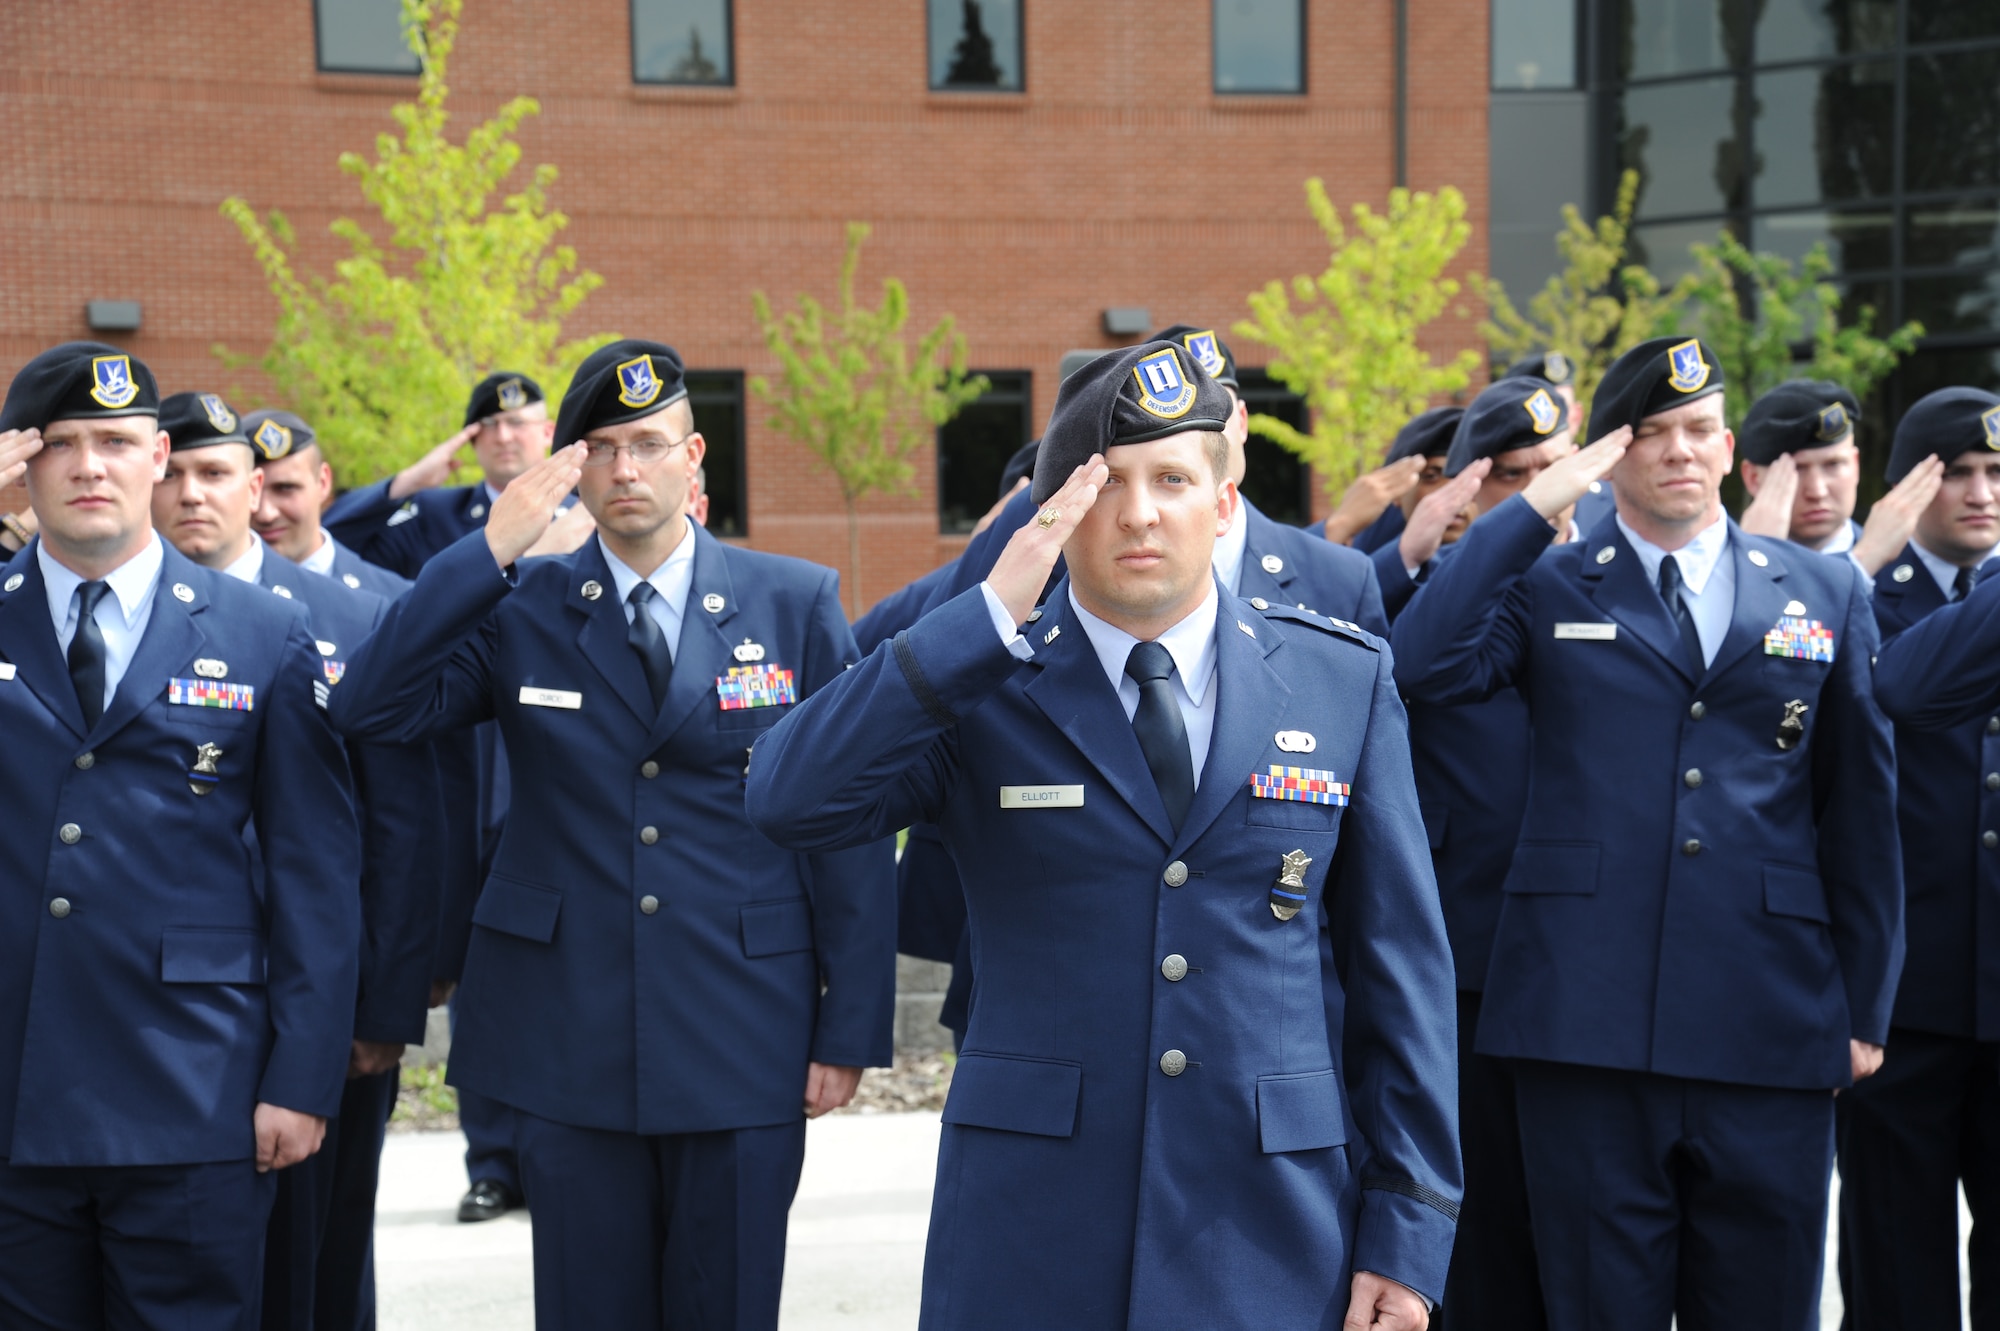 Members from the 92nd Security Forces Squadron salute during the retreat ceremony May 15, 2015, at Fairchild Air Force Base, Wash. Airmen from around Fairchild attended the retreat ceremony that paid special recognition to those law enforcement officers who have lost their lives in the line of duty for the safety and protection of others. (U.S. Air Force photo/Airman 1st Class Nicolo J. Daniello)